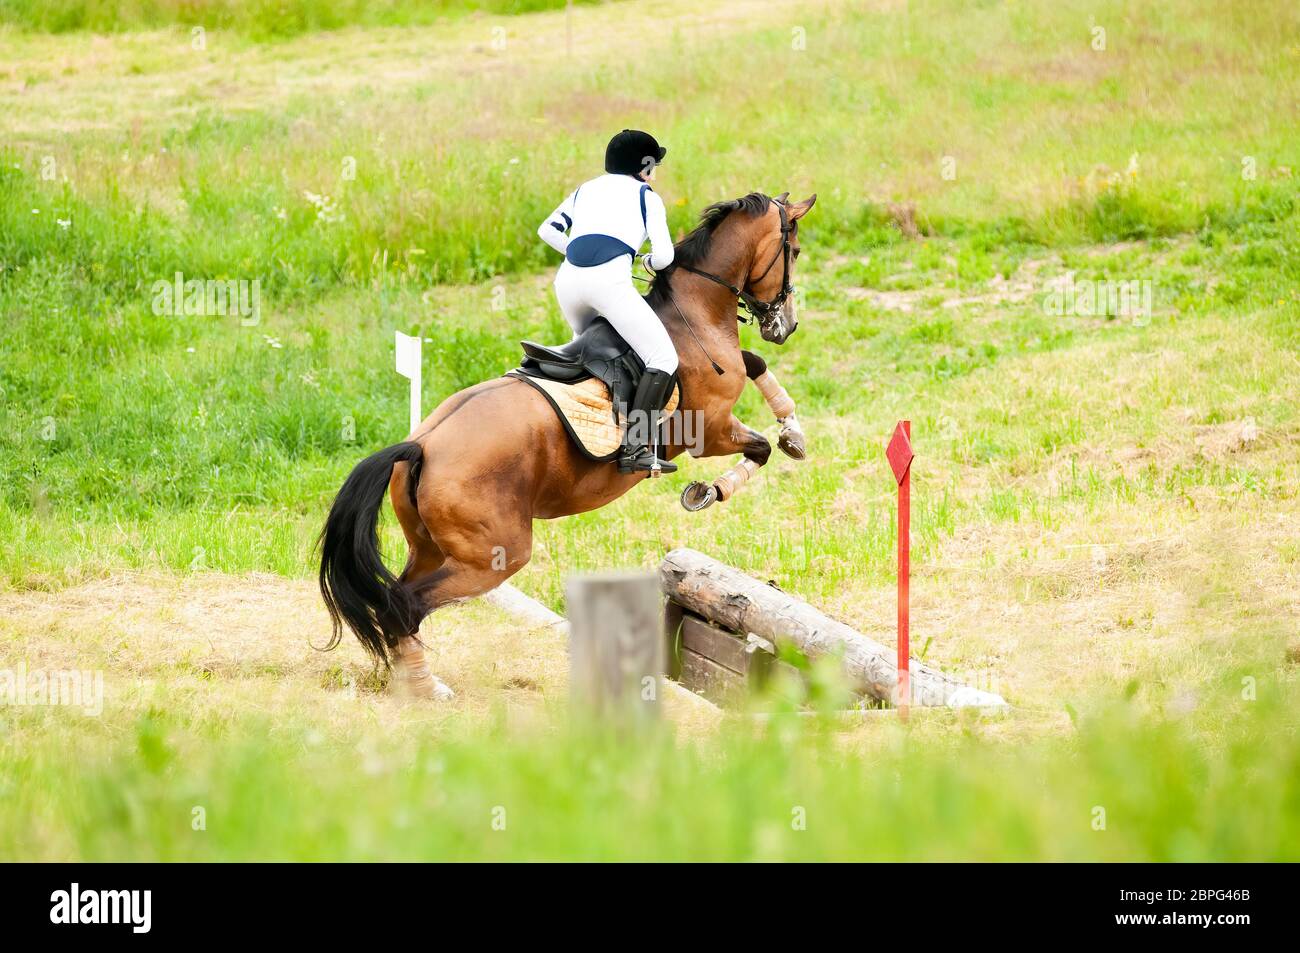 Eventing: equestrian rider jumping over an a log fence obstacle Stock Photo